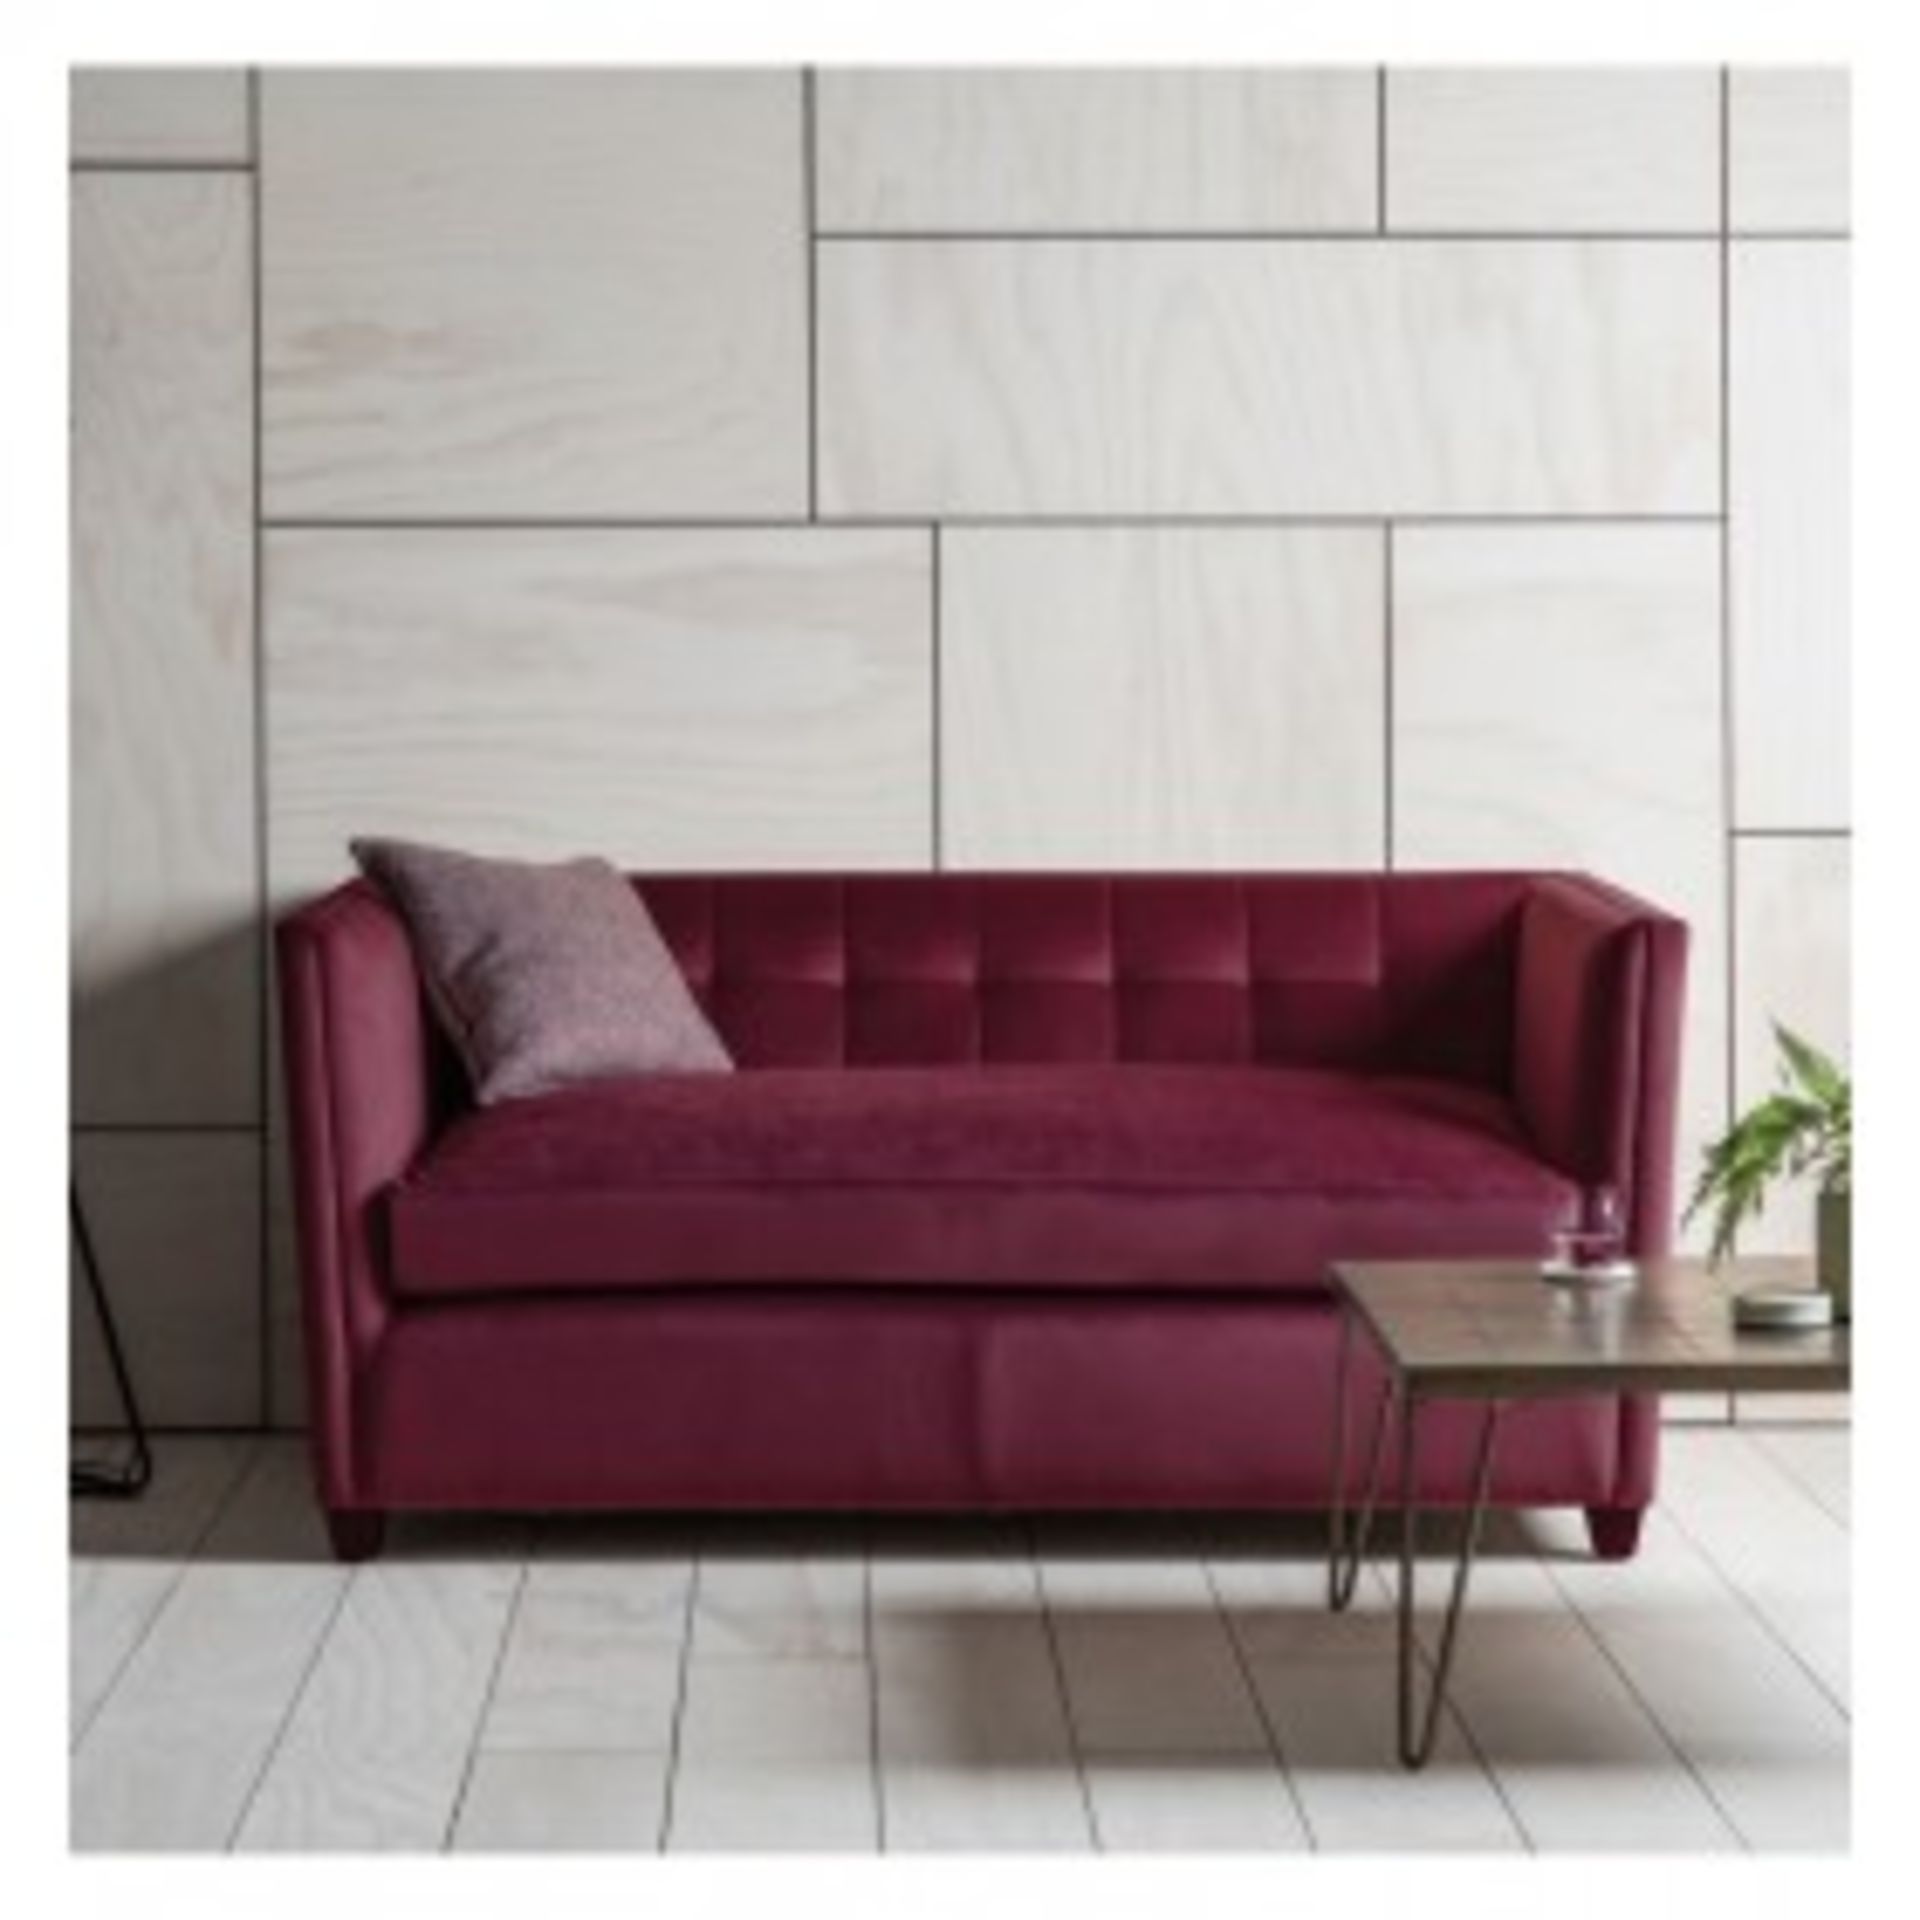 London 2 Seater Sofa in Brussels Chianti Sophisticated style and boutique living are echoed in the - Image 2 of 2